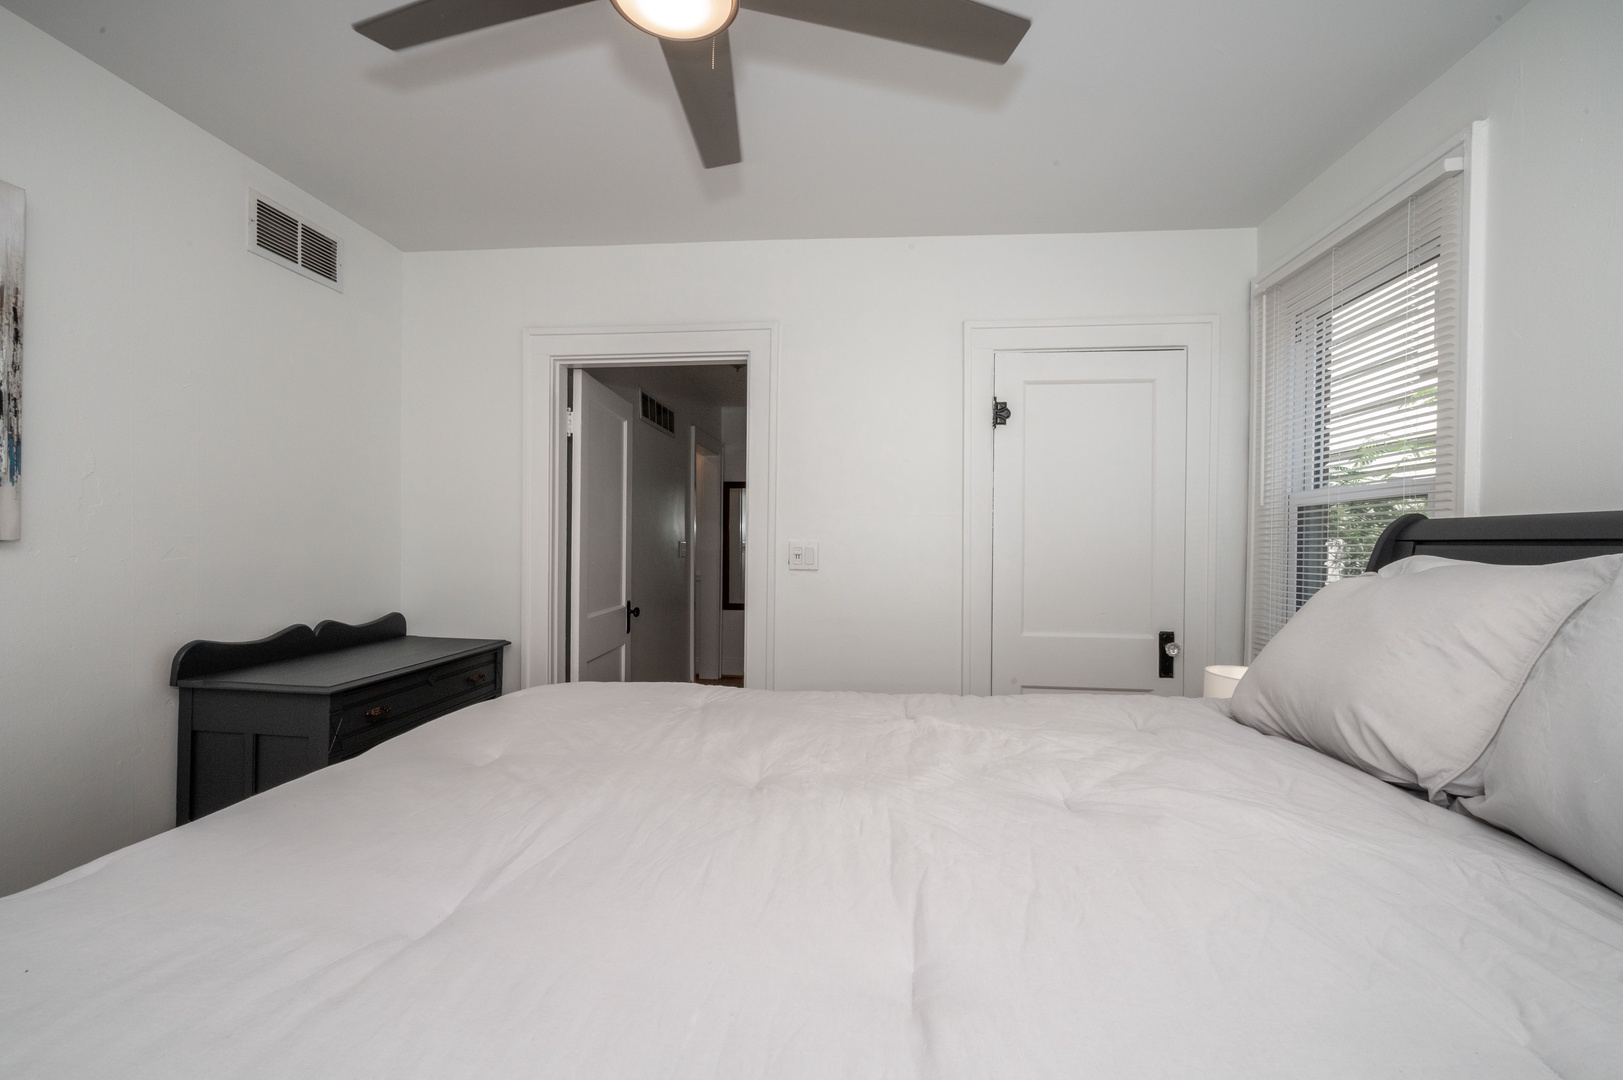 The tranquil queen bedroom includes a ceiling fan & standing mirror